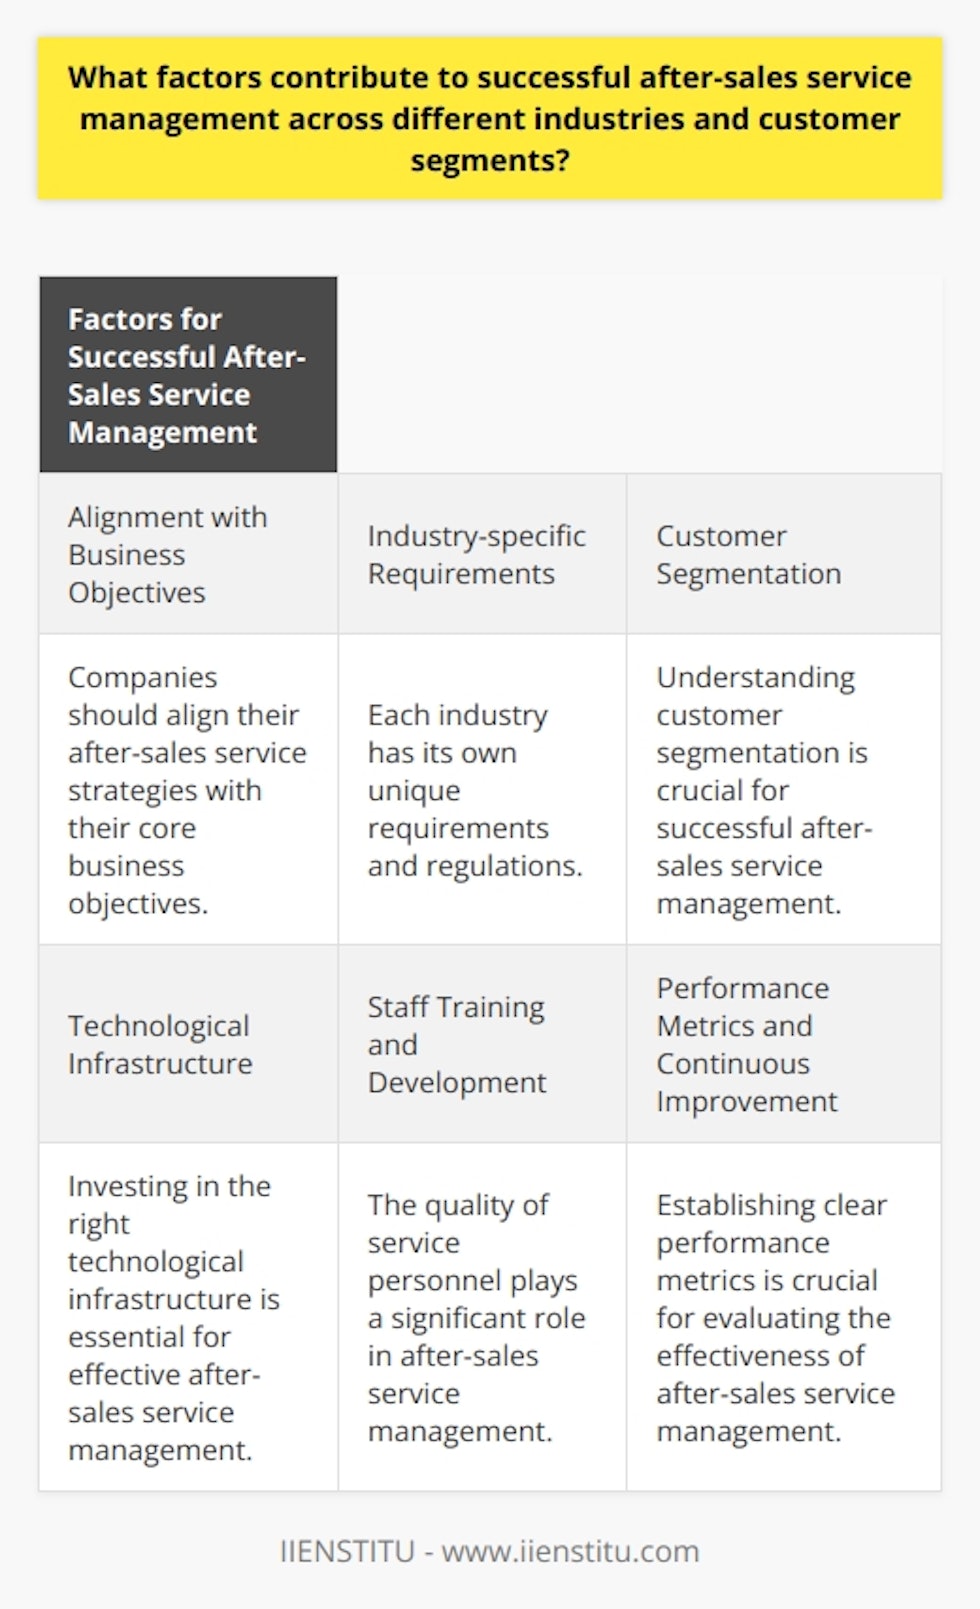 Factors for Successful After-Sales Service ManagementSuccessful after-sales service management is essential for companies across different industries and customer segments. By understanding the key factors that contribute to effective after-sales service, businesses can enhance customer satisfaction, retain clients, and drive growth opportunities. Here are some factors to consider:1. Alignment with Business Objectives: Companies should align their after-sales service strategies with their core business objectives. This ensures that the after-sales service operations contribute to the overall success of the organization.2. Industry-specific Requirements: Each industry has its own unique requirements and regulations. Companies must be aware of and adhere to these industry-specific requirements when managing after-sales service. This helps in meeting consumer tendencies and ensuring compliance with regulations.3. Customer Segmentation: Understanding customer segmentation is crucial for successful after-sales service management. Different customer segments have varying expectations and needs. By tailoring the service approach to meet the specific needs of each segment, businesses can increase customer satisfaction and loyalty.4. Technological Infrastructure: Investing in the right technological infrastructure is essential for effective after-sales service management. Implementing advanced technologies, such as CRM systems, can help track customer interactions, preferences, and service delivery performance. Automation and artificial intelligence can also improve efficiency and reduce errors in areas like inventory management and incident reporting.5. Staff Training and Development: The quality of service personnel plays a significant role in after-sales service management. Providing comprehensive training and development programs ensures that staff have the necessary skills and knowledge to handle diverse customer concerns effectively. Creating a service-oriented culture within the organization also motivates employees to prioritize customer satisfaction and service excellence.6. Performance Metrics and Continuous Improvement: Establishing clear performance metrics is crucial for evaluating the effectiveness of after-sales service management. Metrics such as customer satisfaction scores, resolution time, and repeat business rates help identify areas for improvement. Regular performance assessments based on these metrics enable organizations to implement necessary adjustments, ensuring continuous improvement and success in after-sales service management.Effective after-sales service management requires considering cross-industry factors, understanding customer segmentation, investing in technological infrastructure, providing staff training and development, and establishing performance metrics for continuous improvement. By focusing on these factors, businesses can achieve successful after-sales service management and drive customer satisfaction and loyalty.